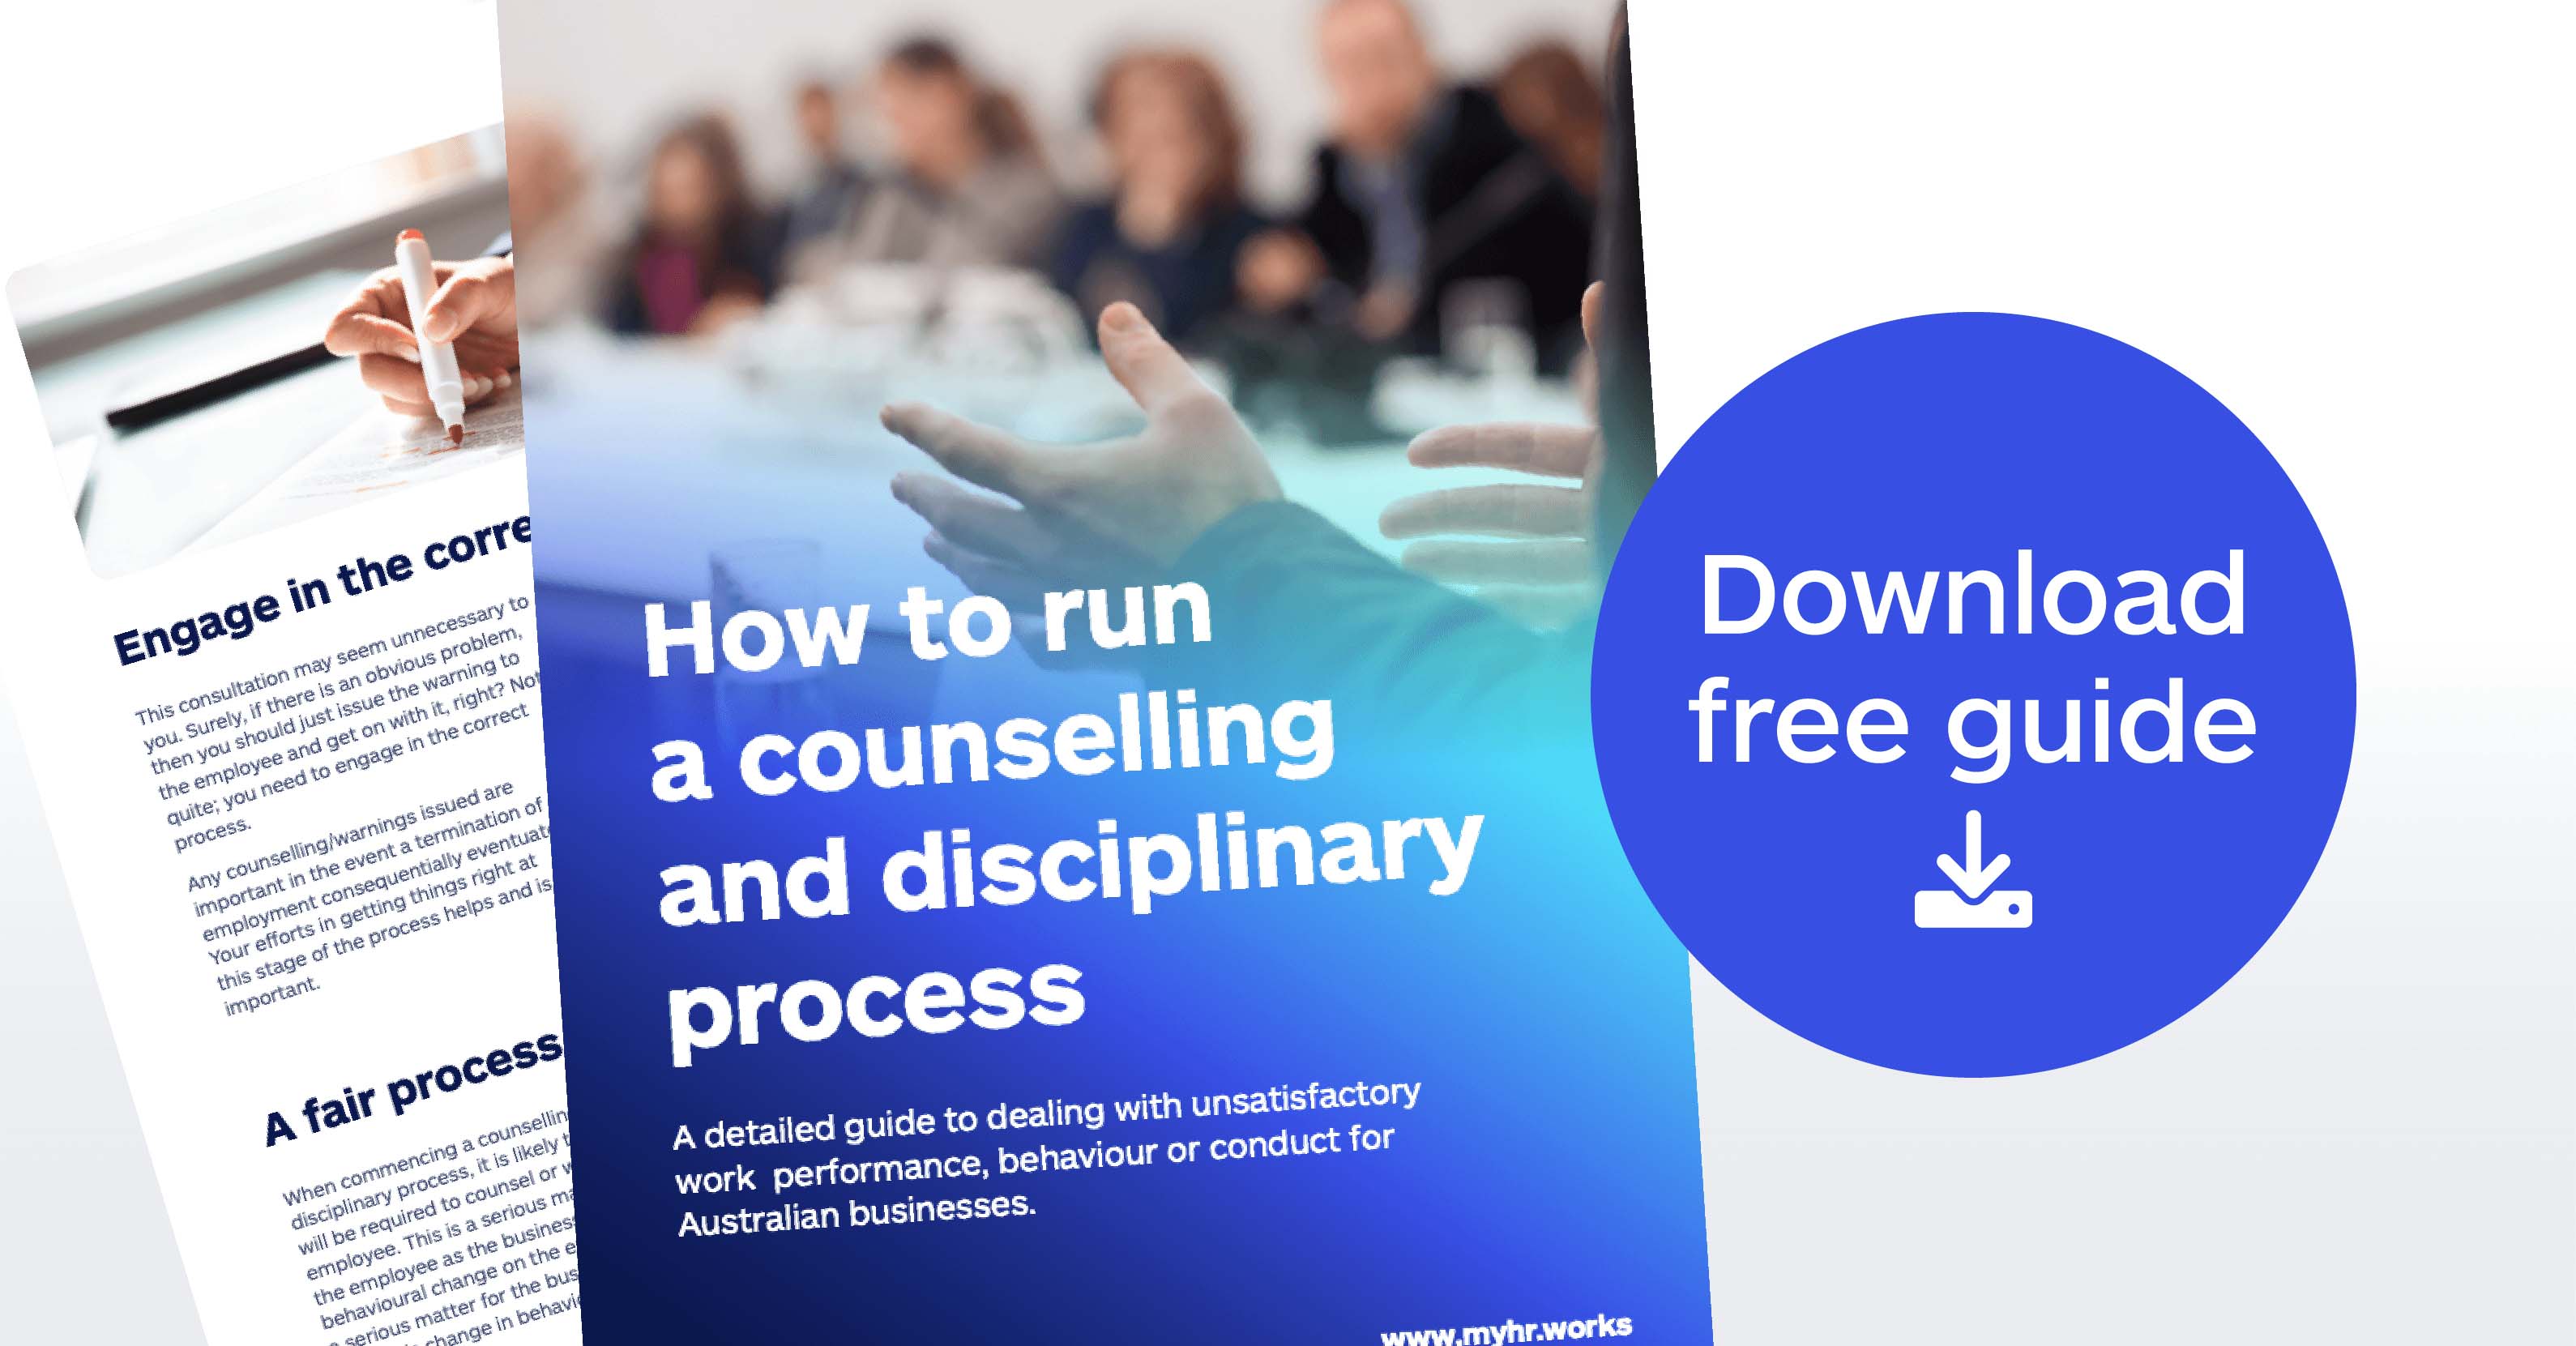 How to Run a Counselling & Disciplinary Process